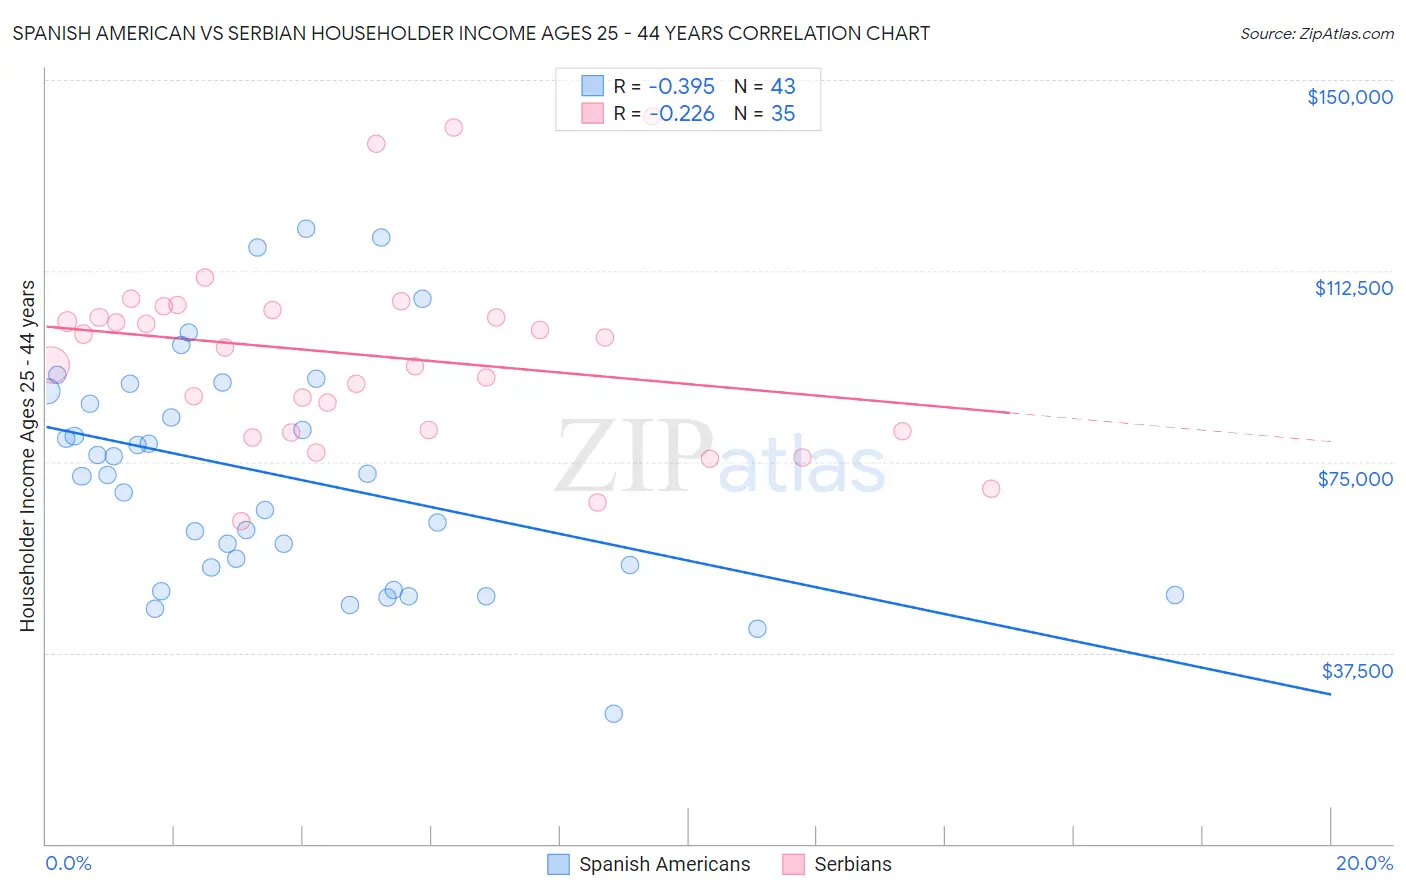 Spanish American vs Serbian Householder Income Ages 25 - 44 years